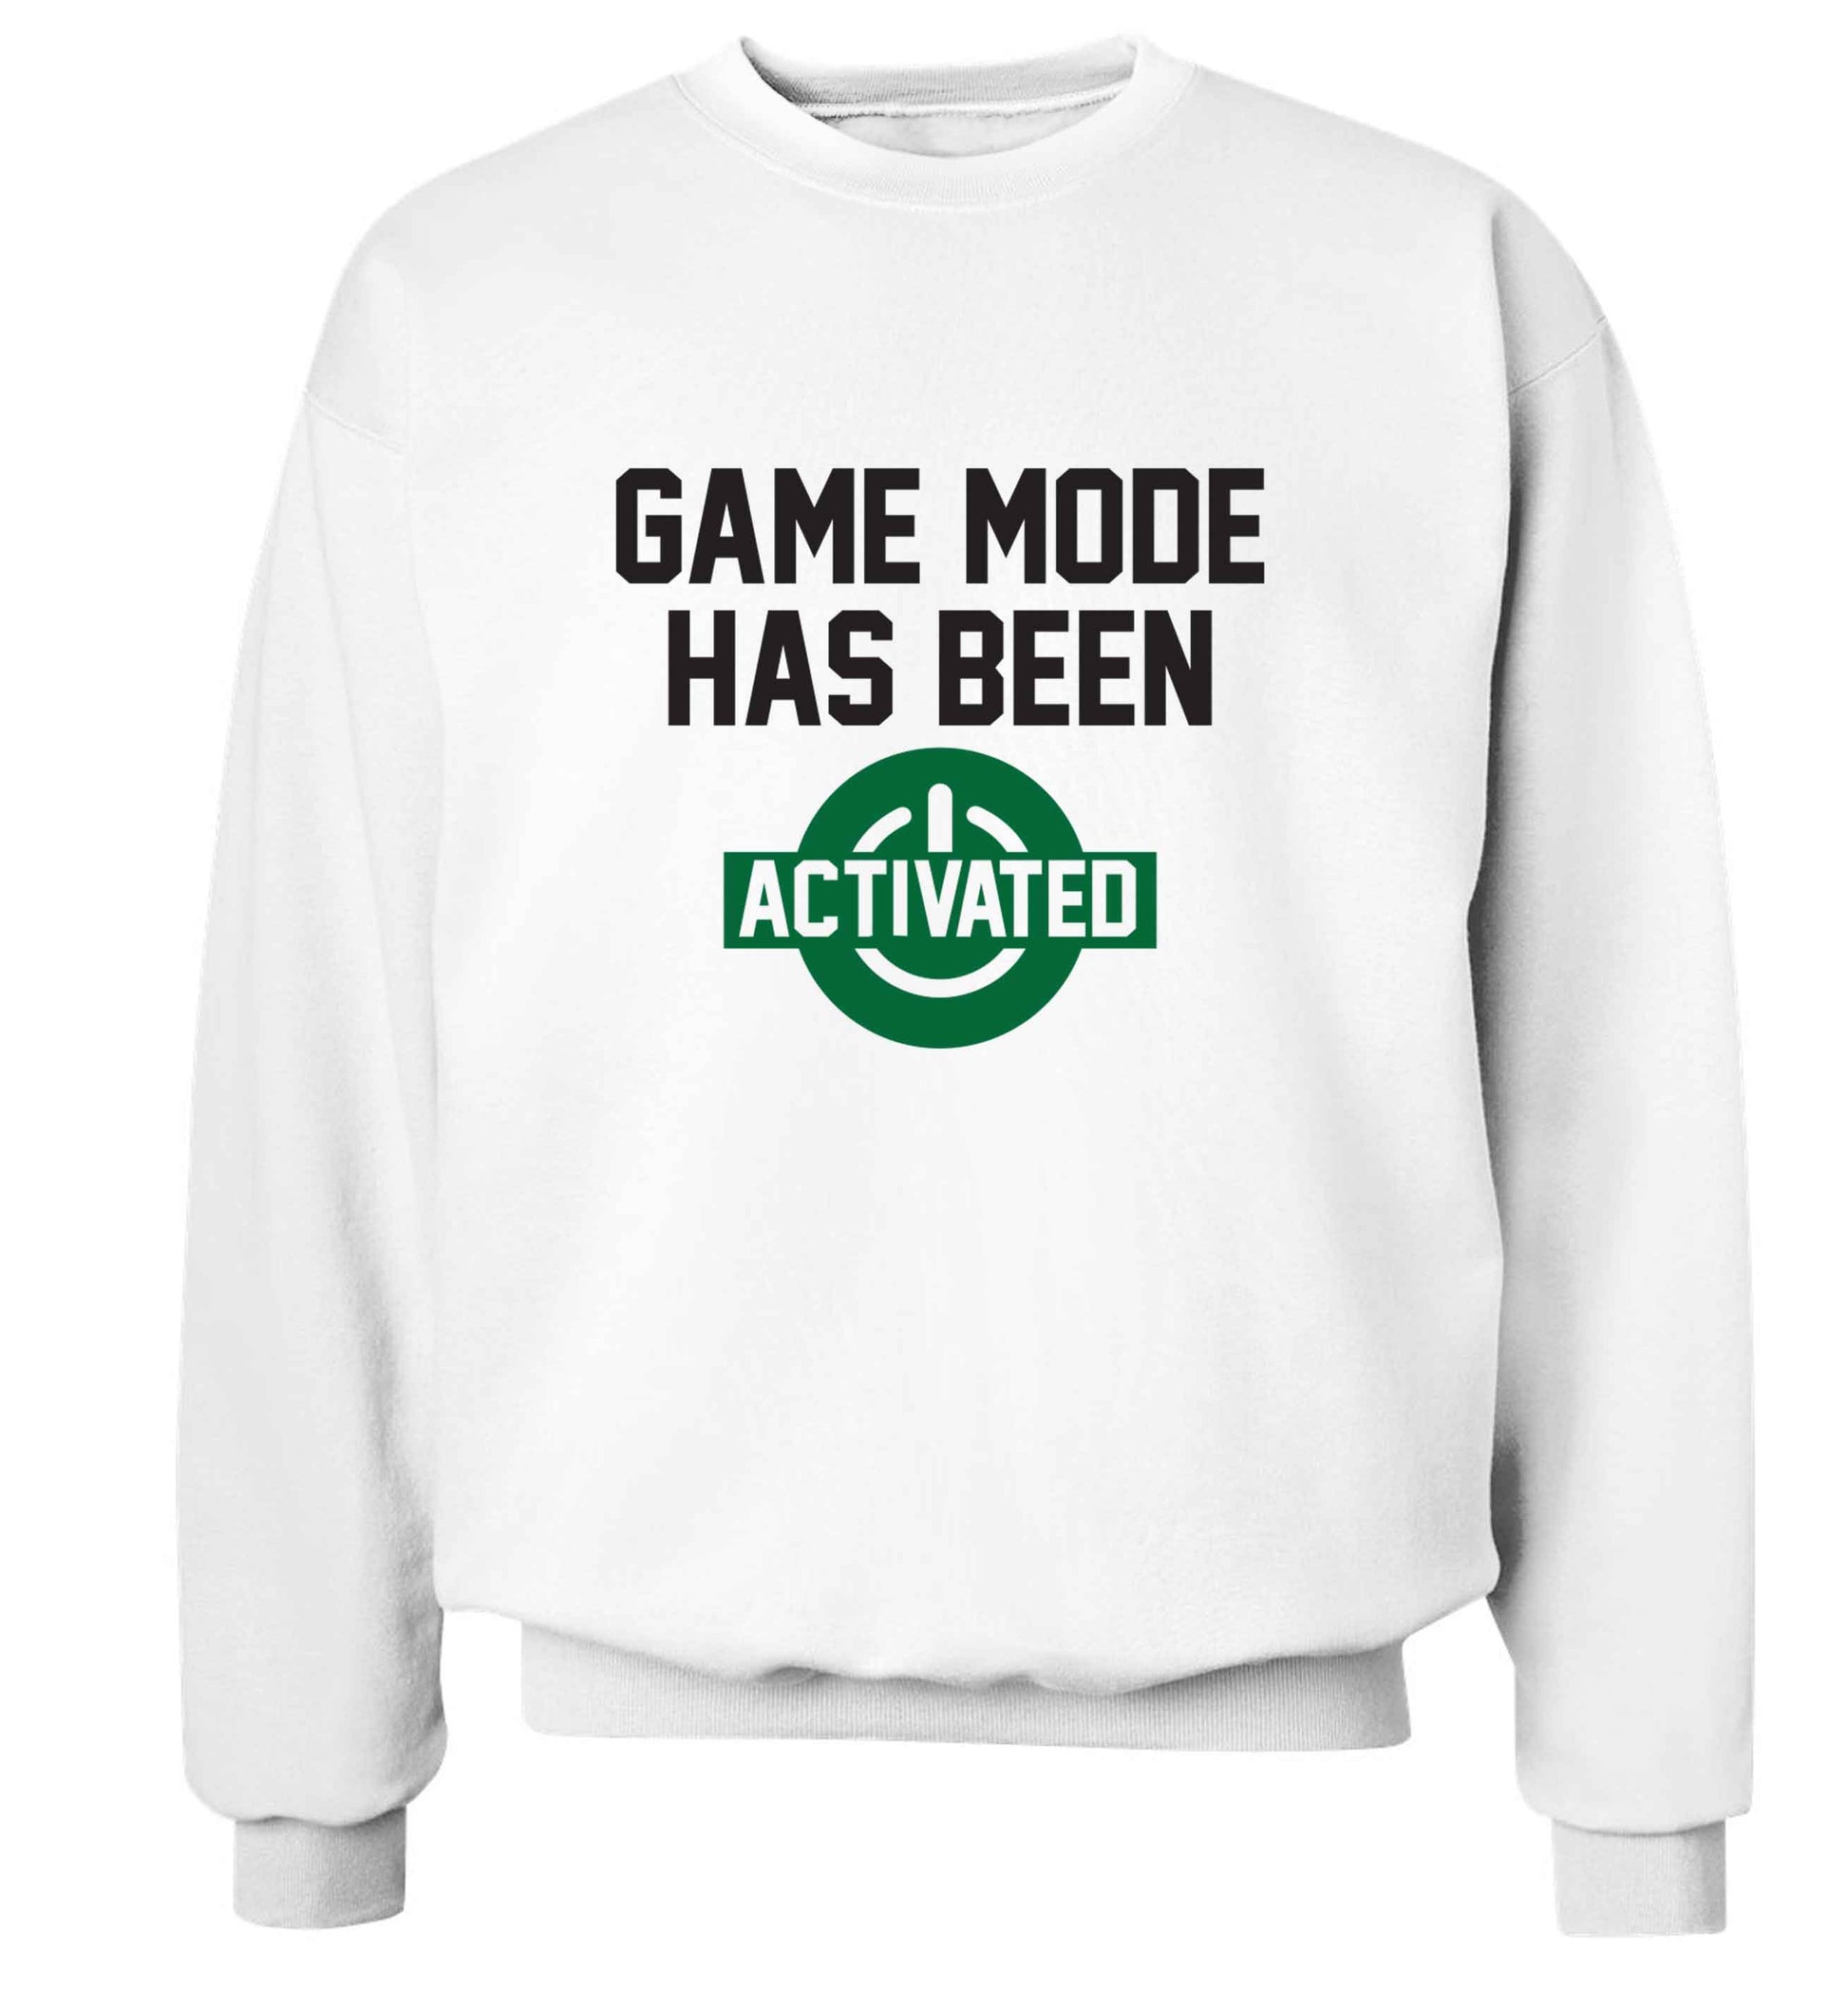 Game mode has been activated adult's unisex white sweater 2XL